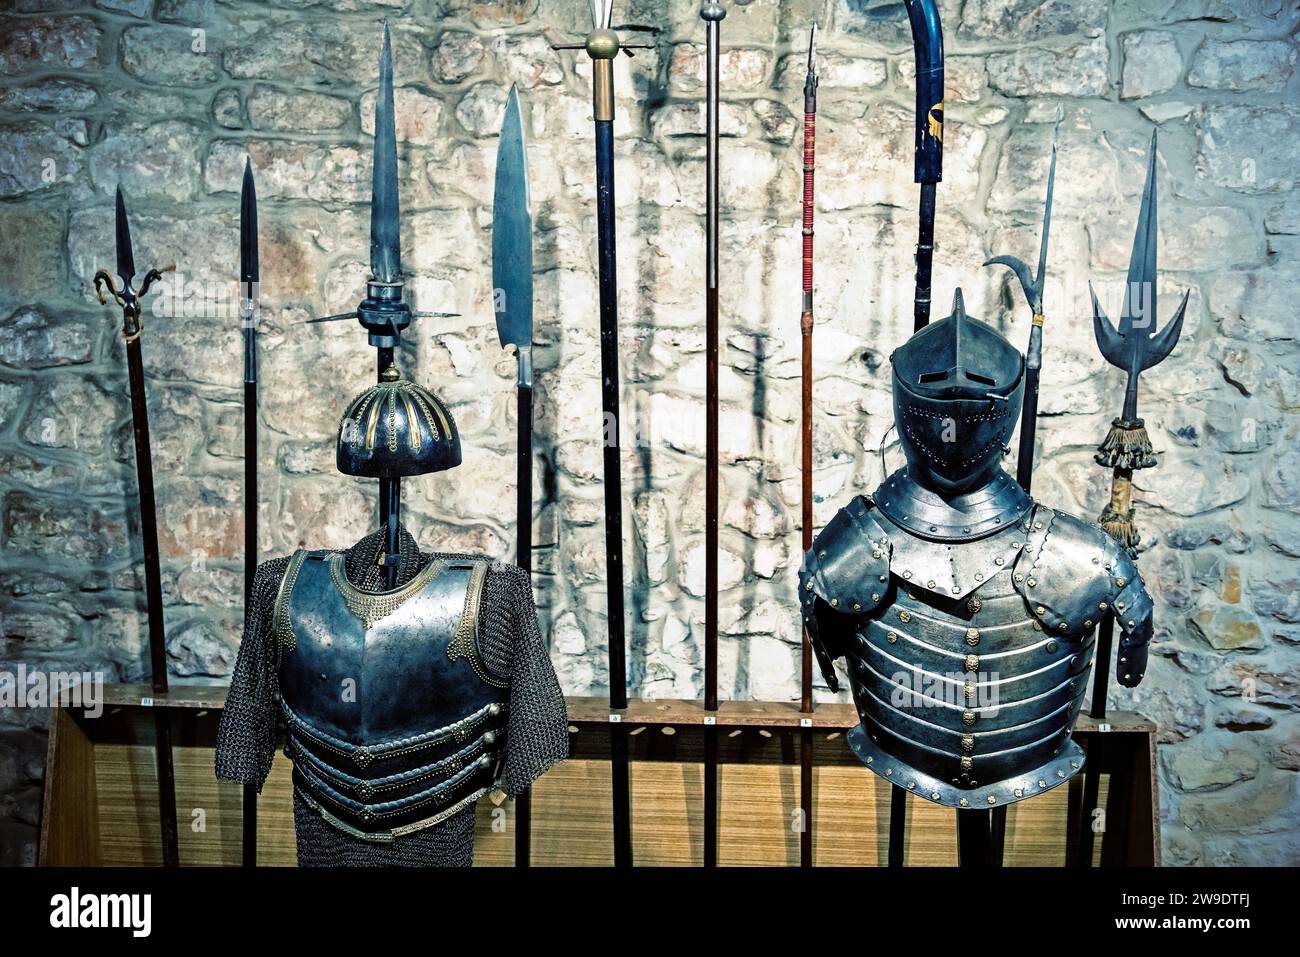 Gallery of knight's armor. Knight's iron armor in the museum. toned. Stock Photo